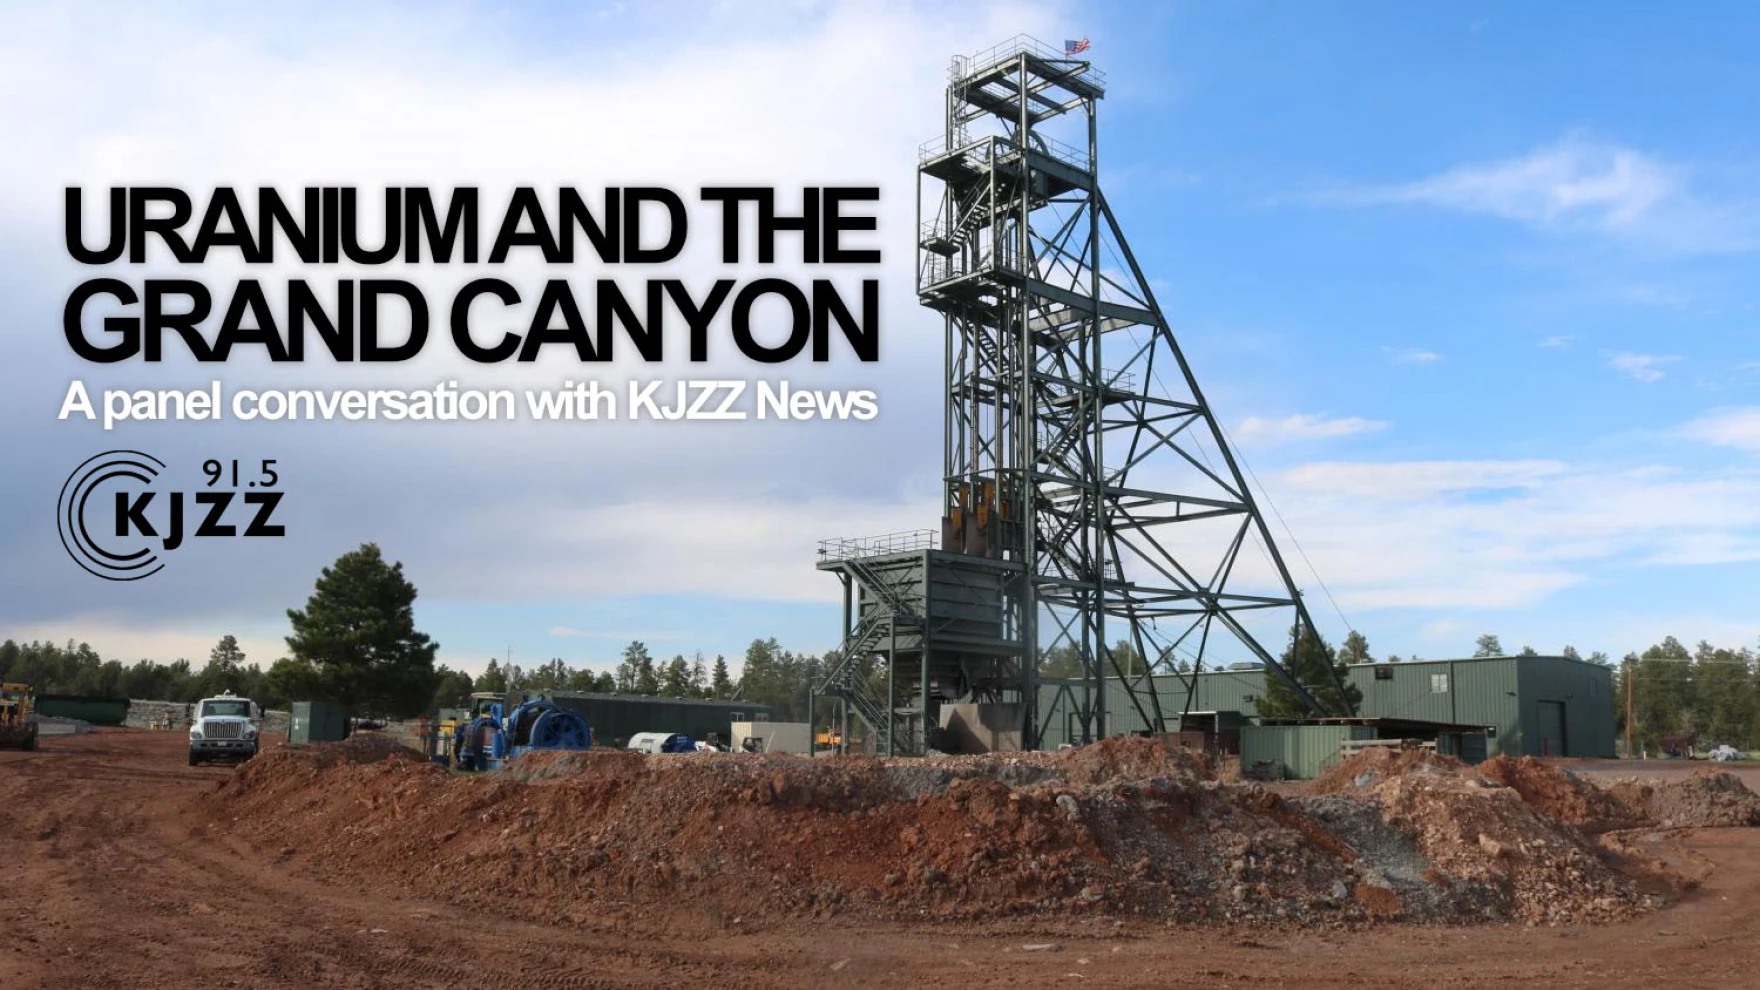 [Image of promotional banner for Uranium and the Grand Canyon - A panel conversation with KJZZ News]